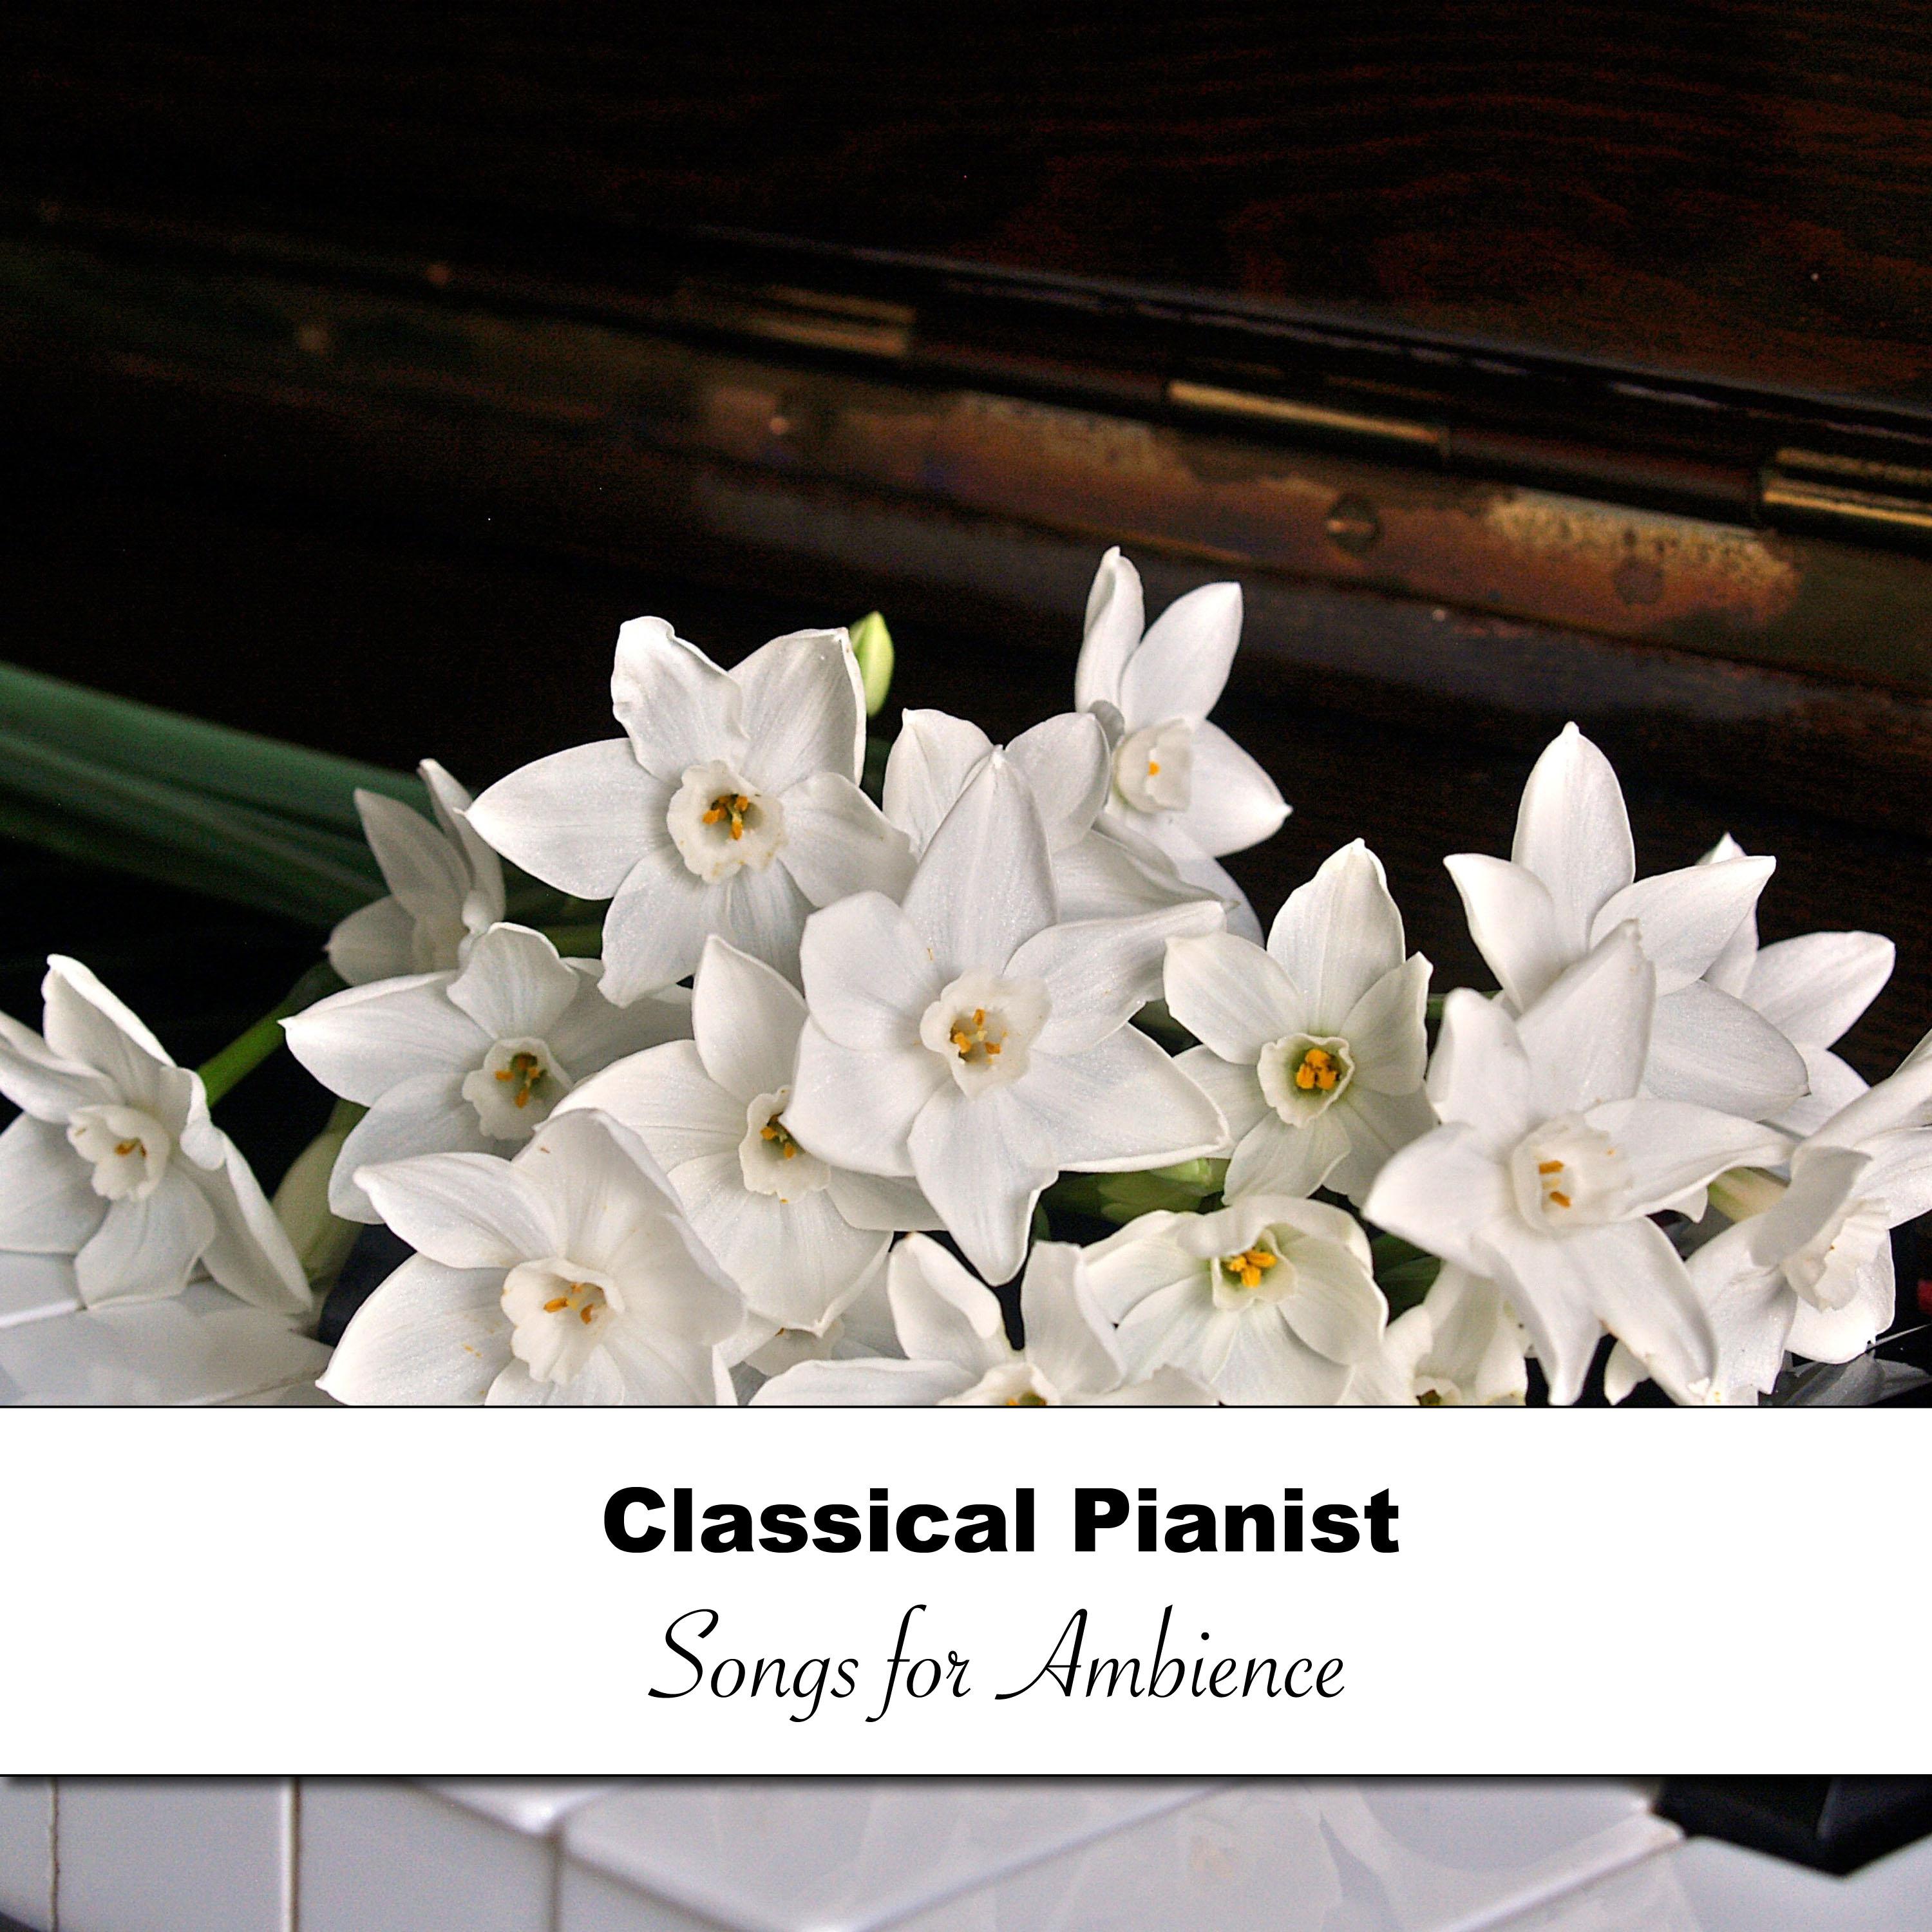 18 Classical Pianist Songs for Ambience